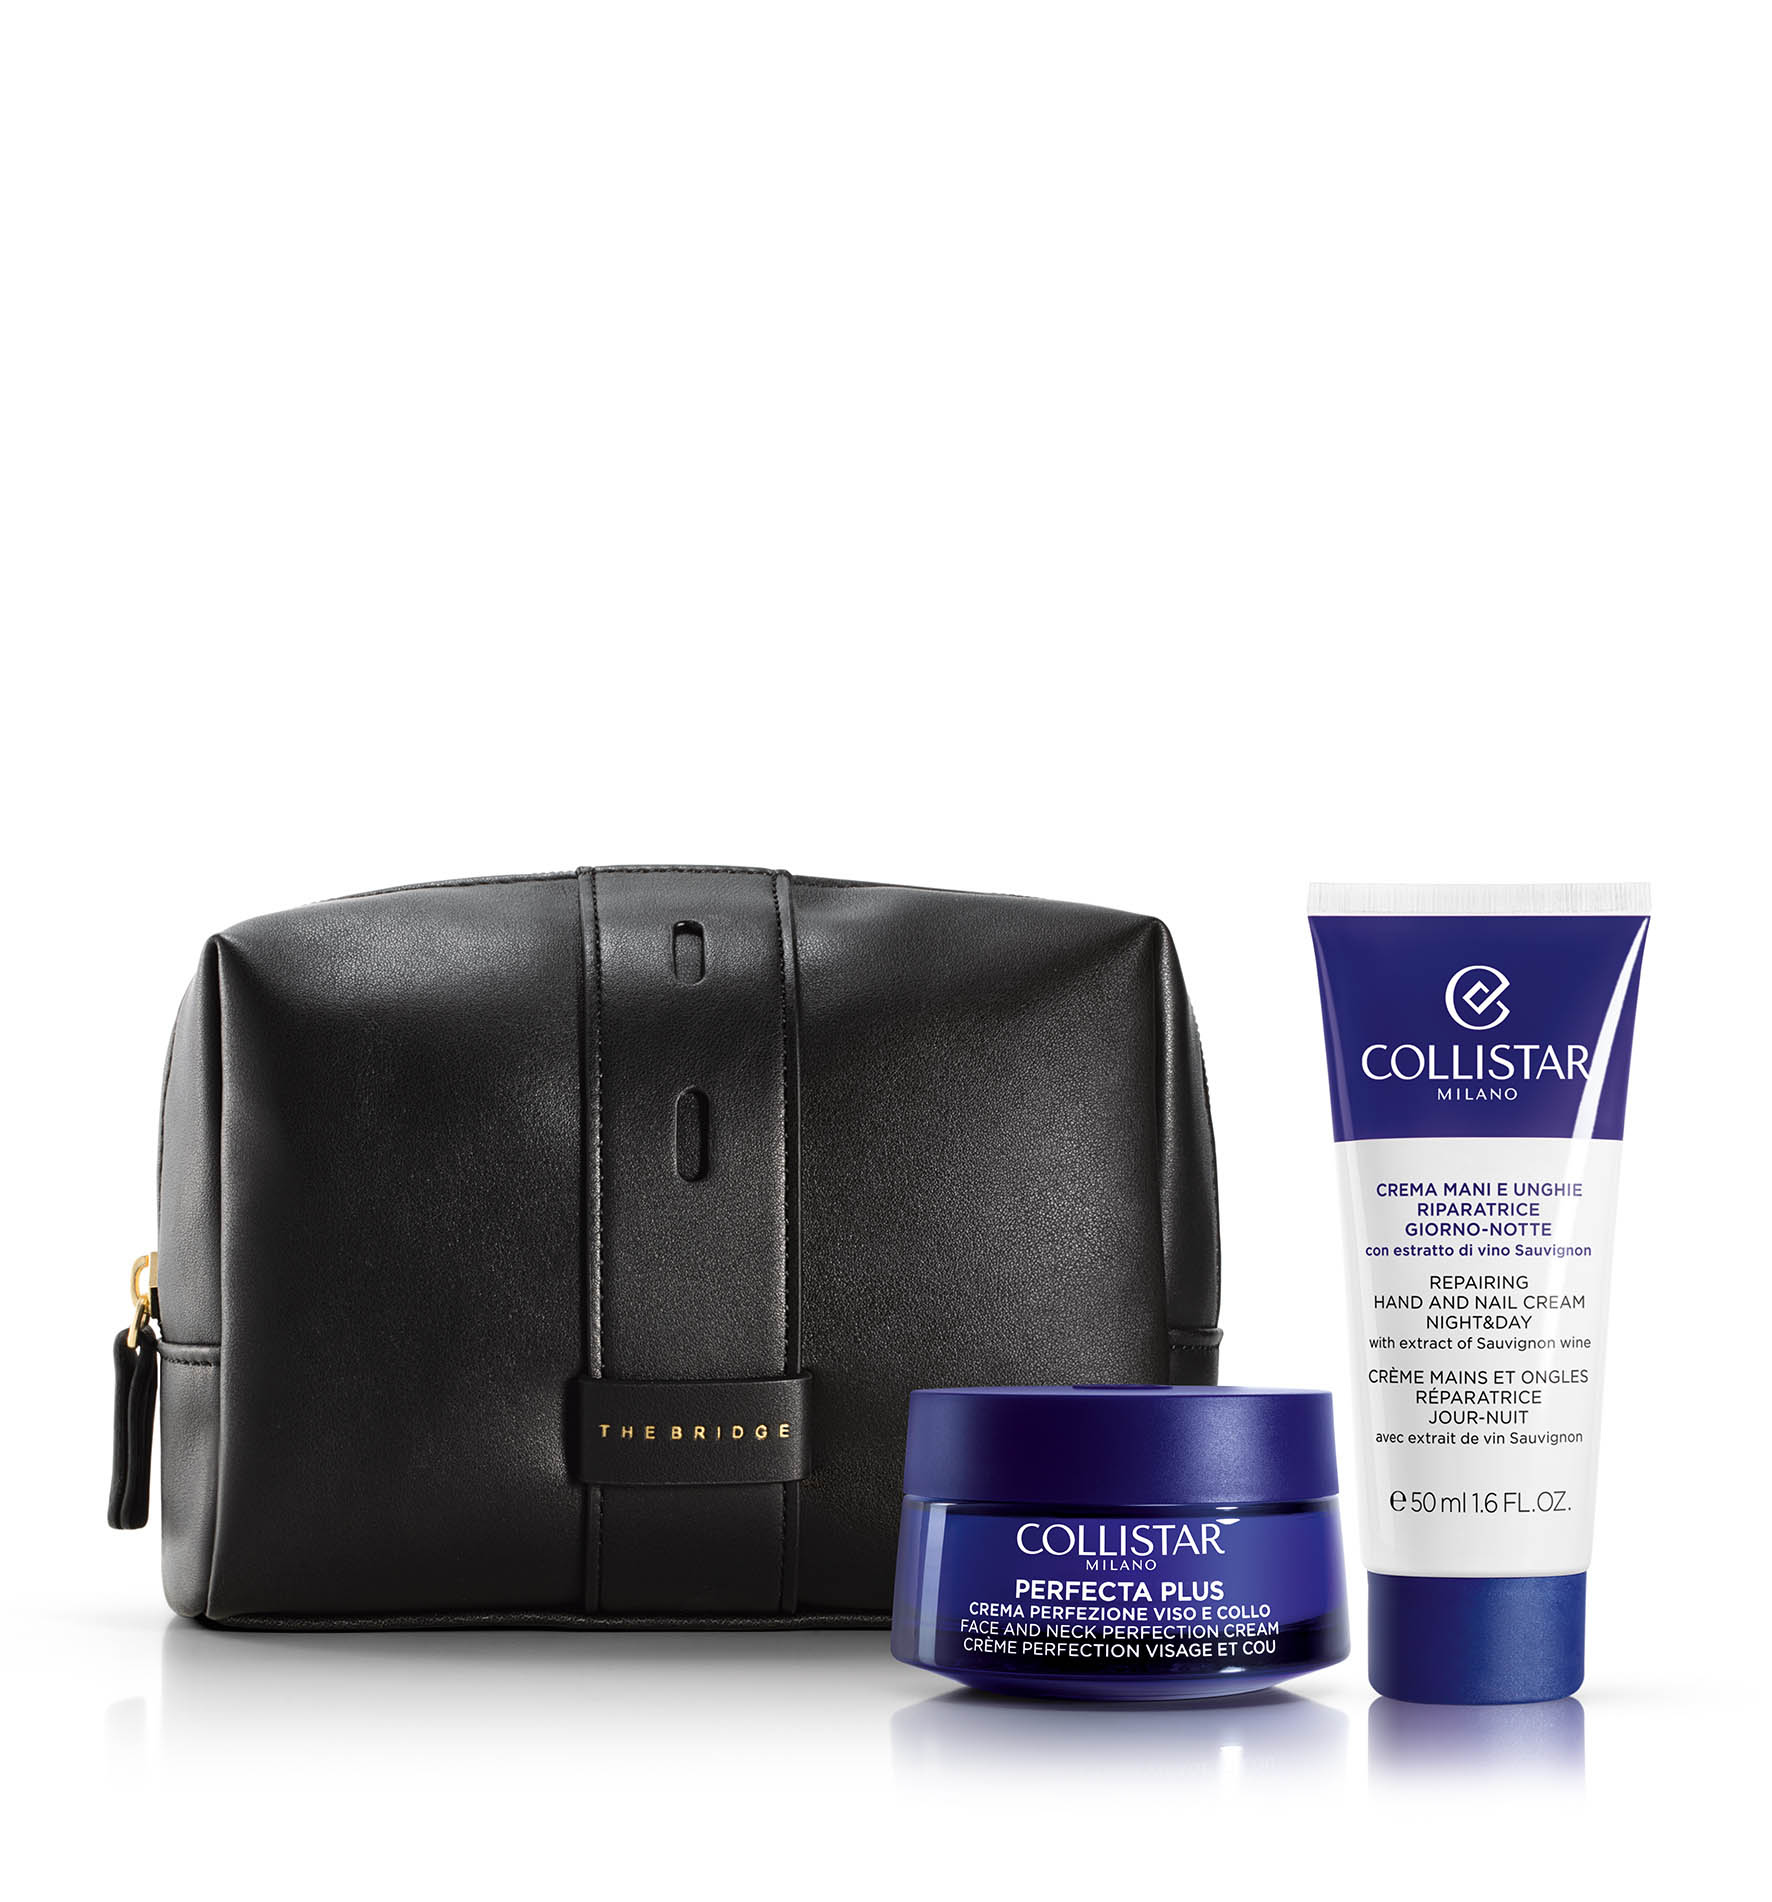 PERFECTA PLUS FACE AND NECK PERFECTION CREAM SET - For her | Collistar - Shop Online Ufficiale